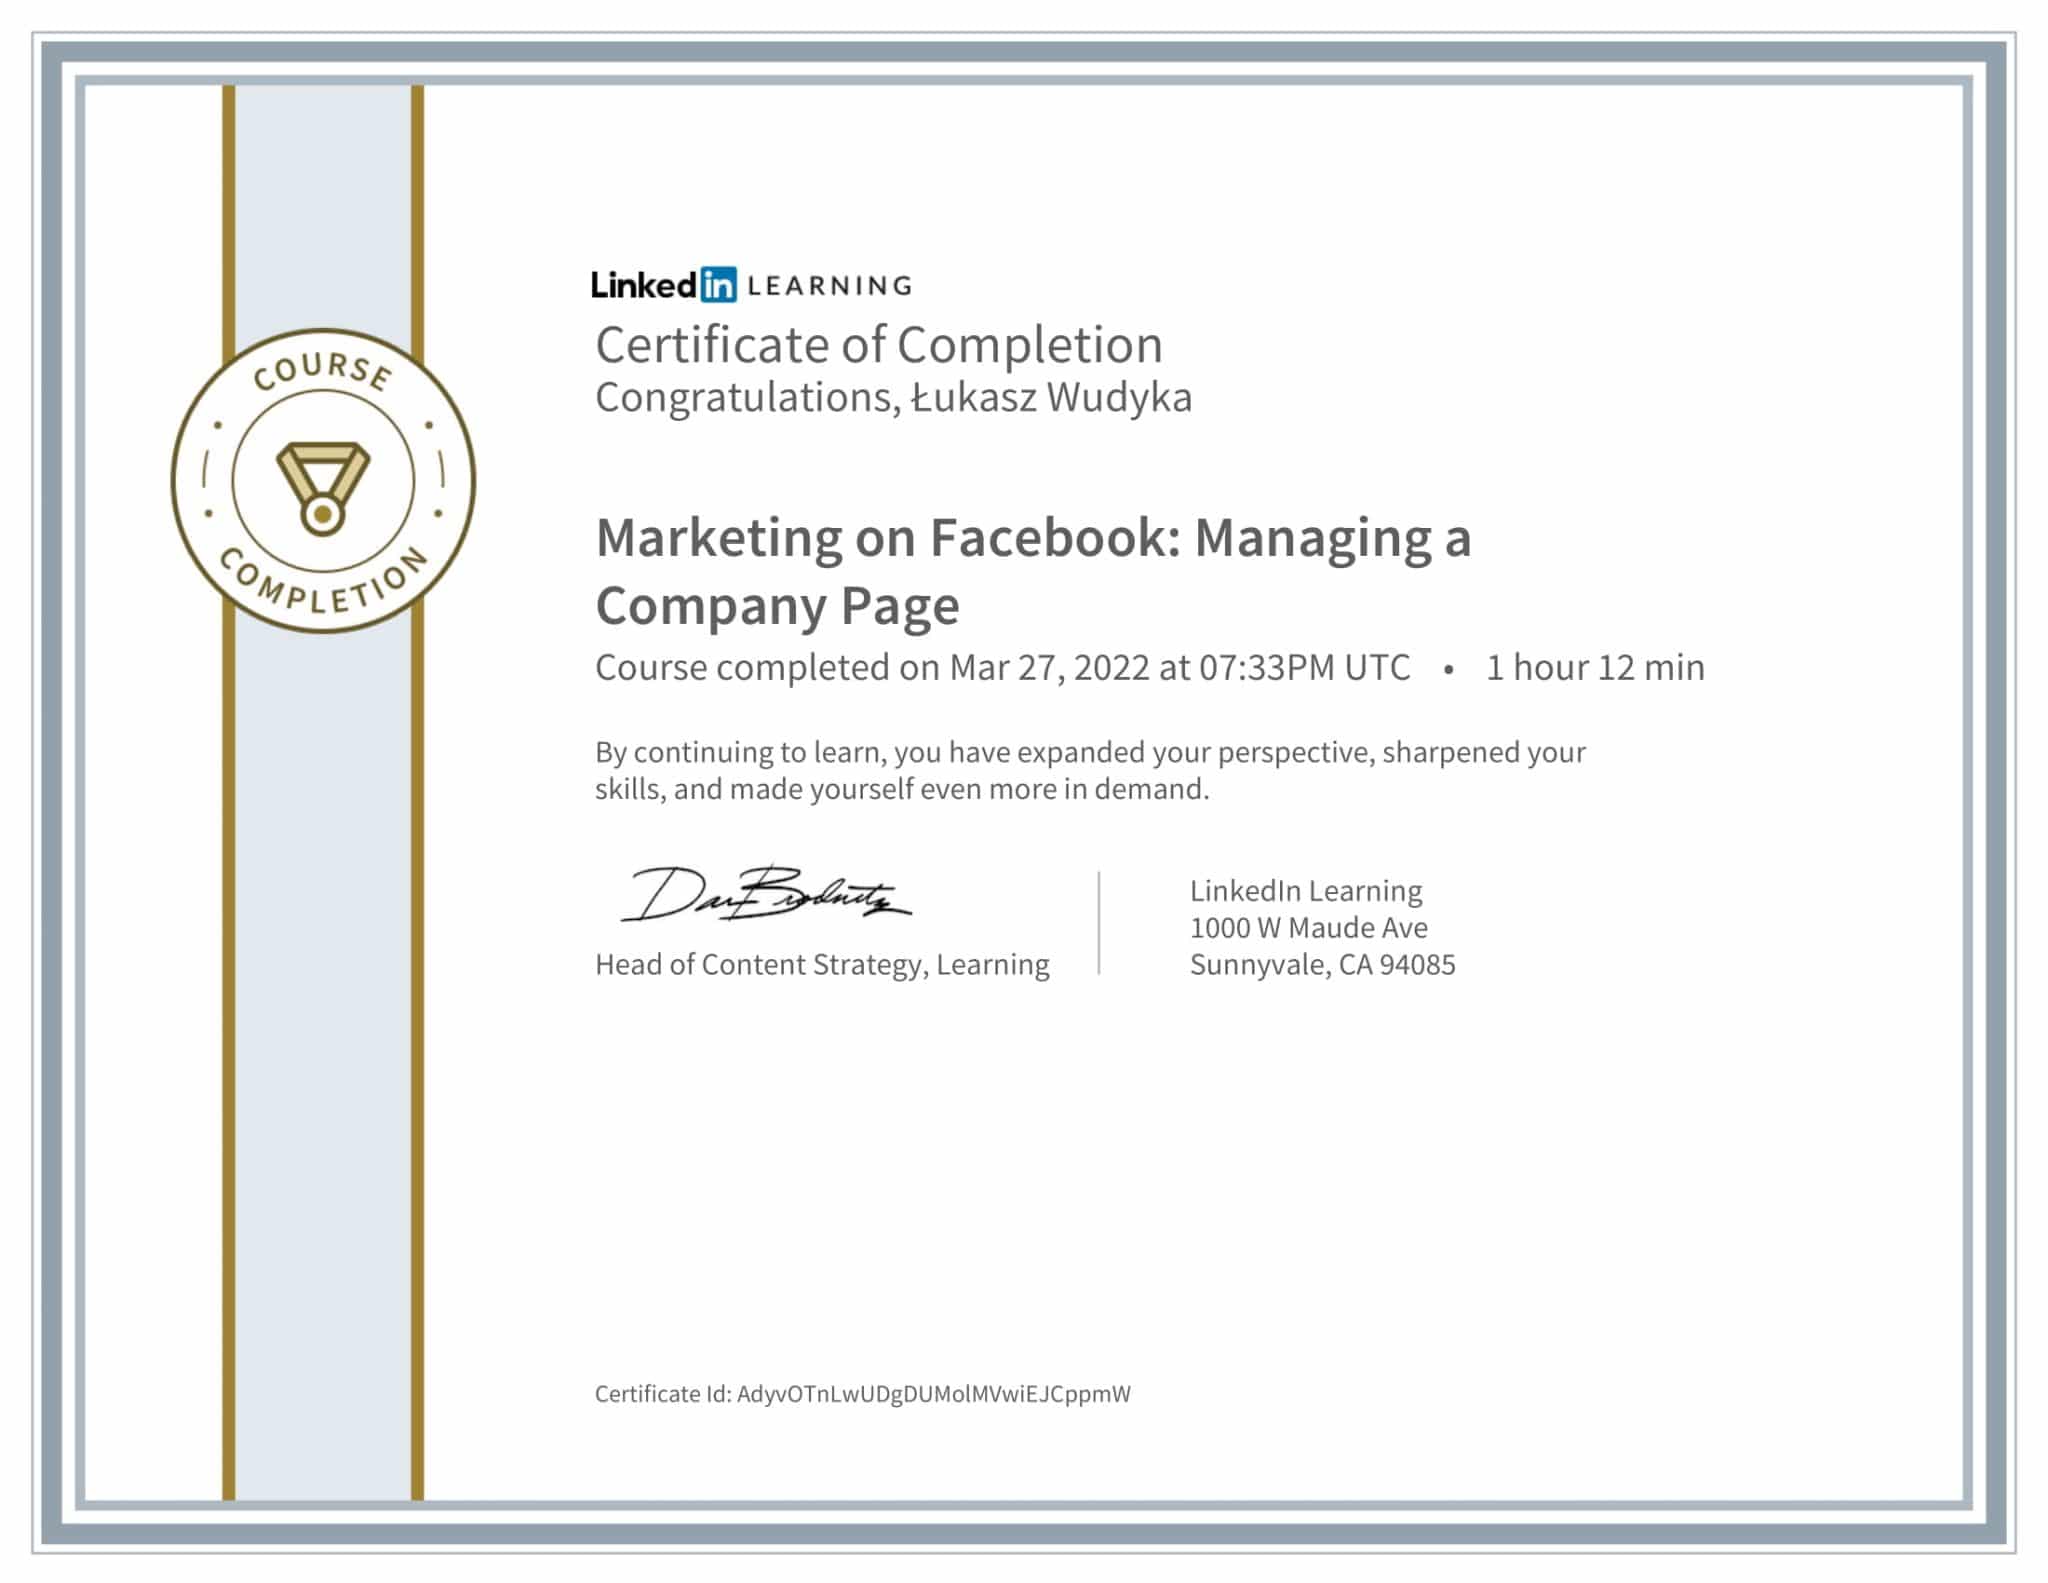 CertificateOfCompletion_Marketing on Facebook Managing a Company Page-1